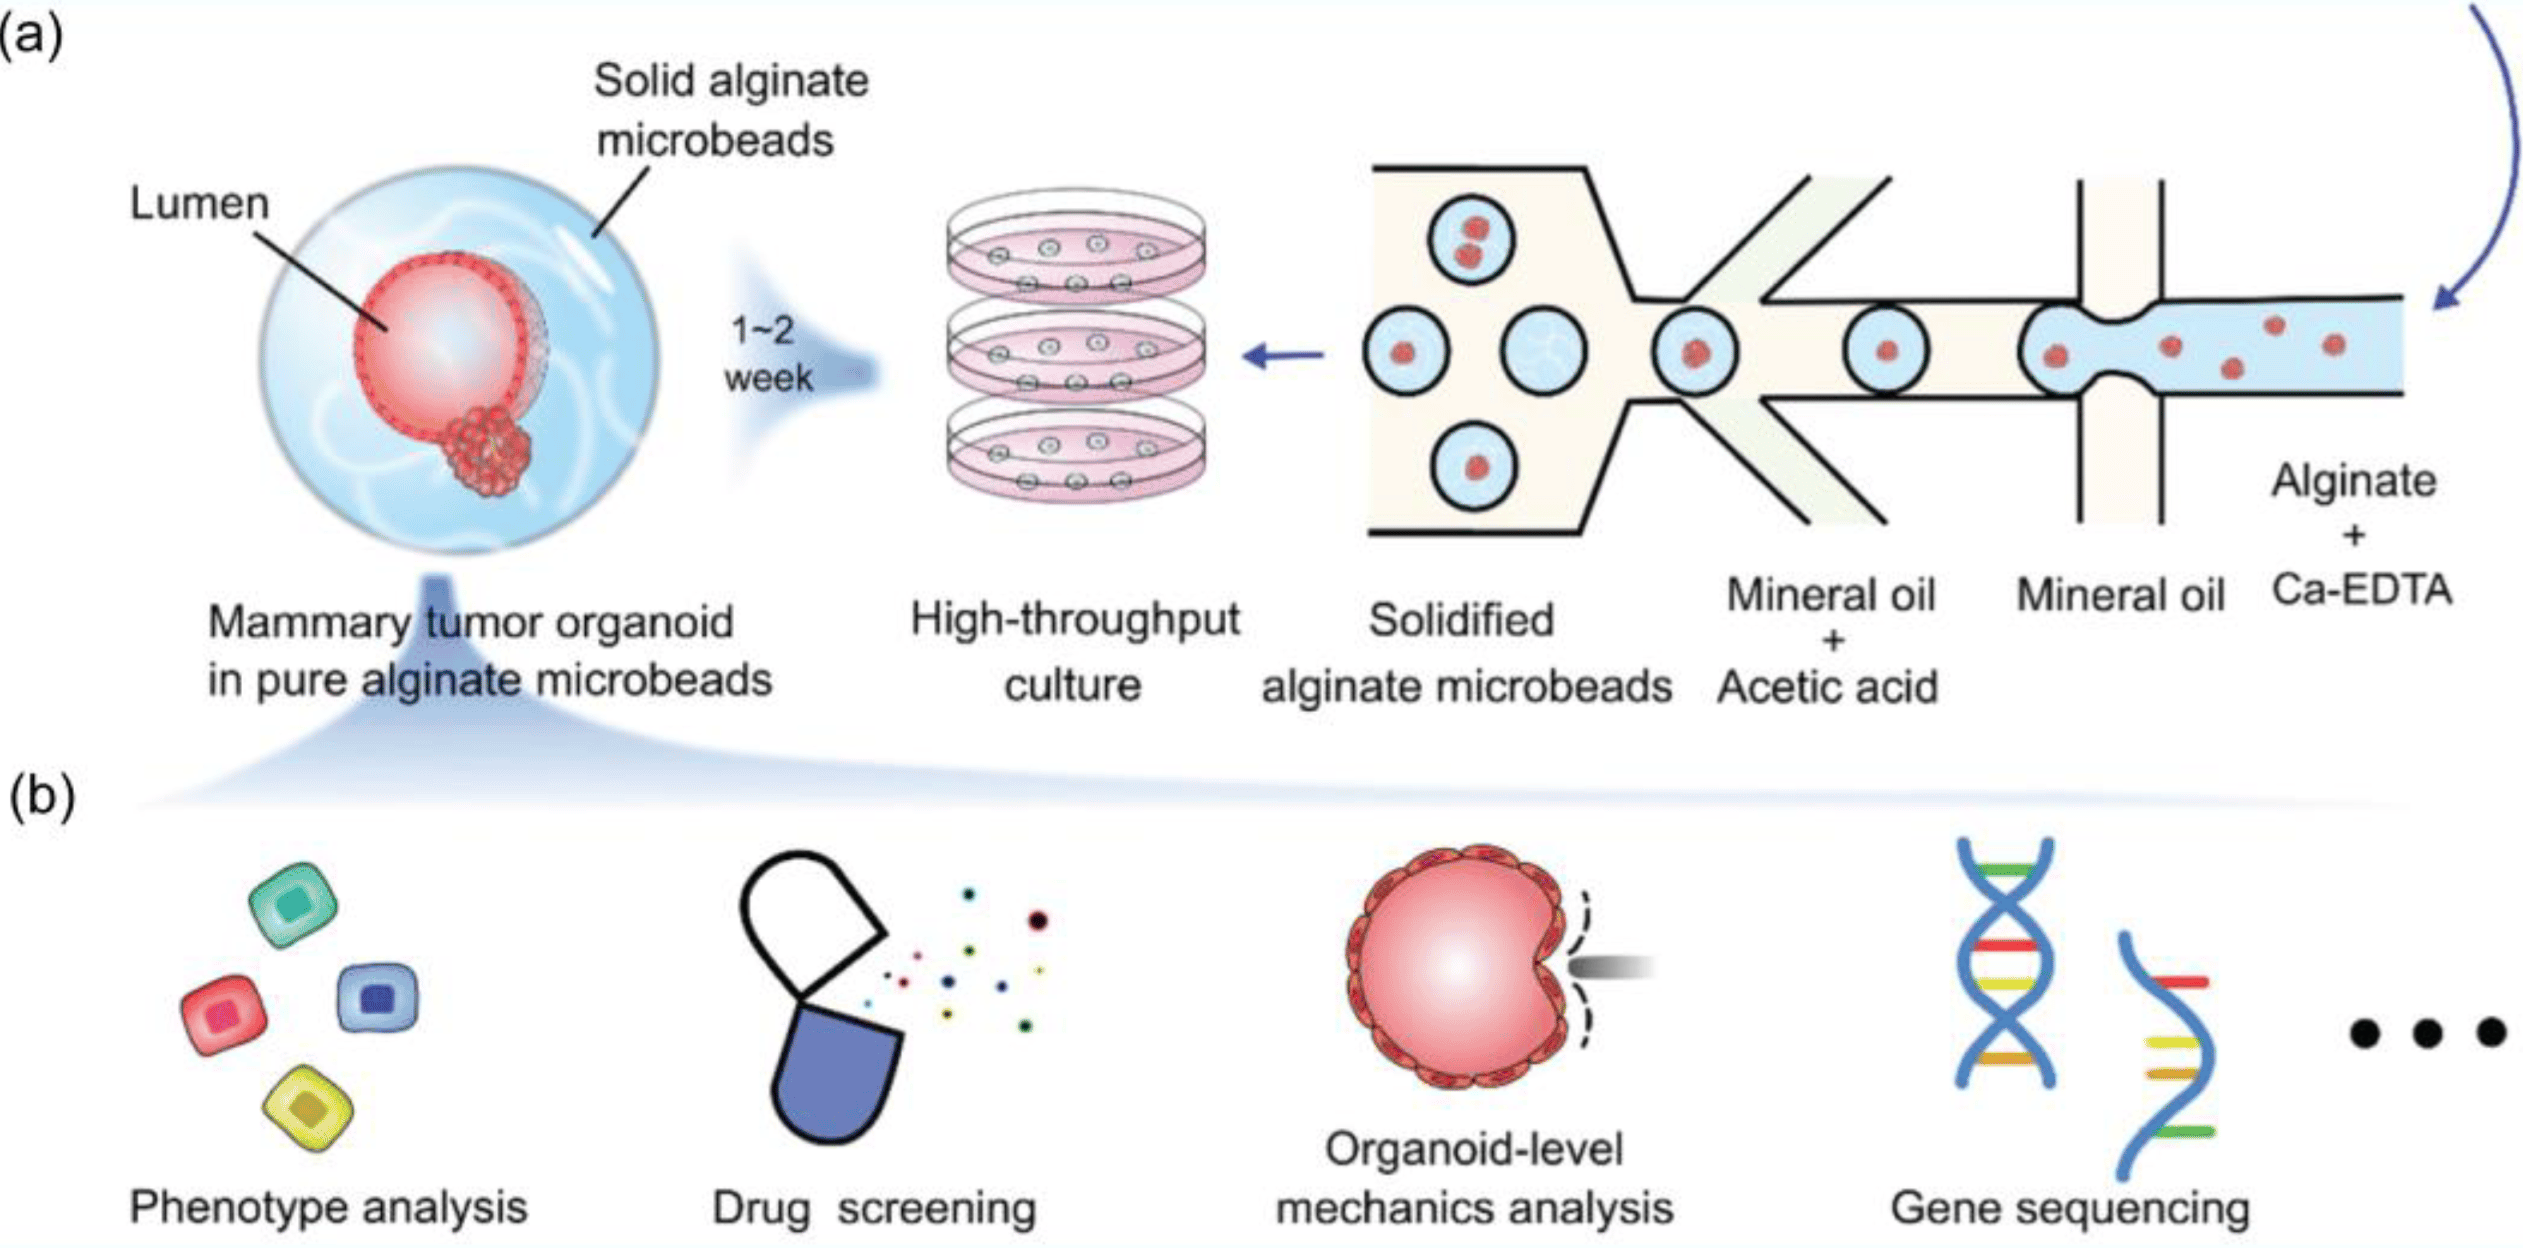 Examples of droplet-based microfluidic applications in drug screening.